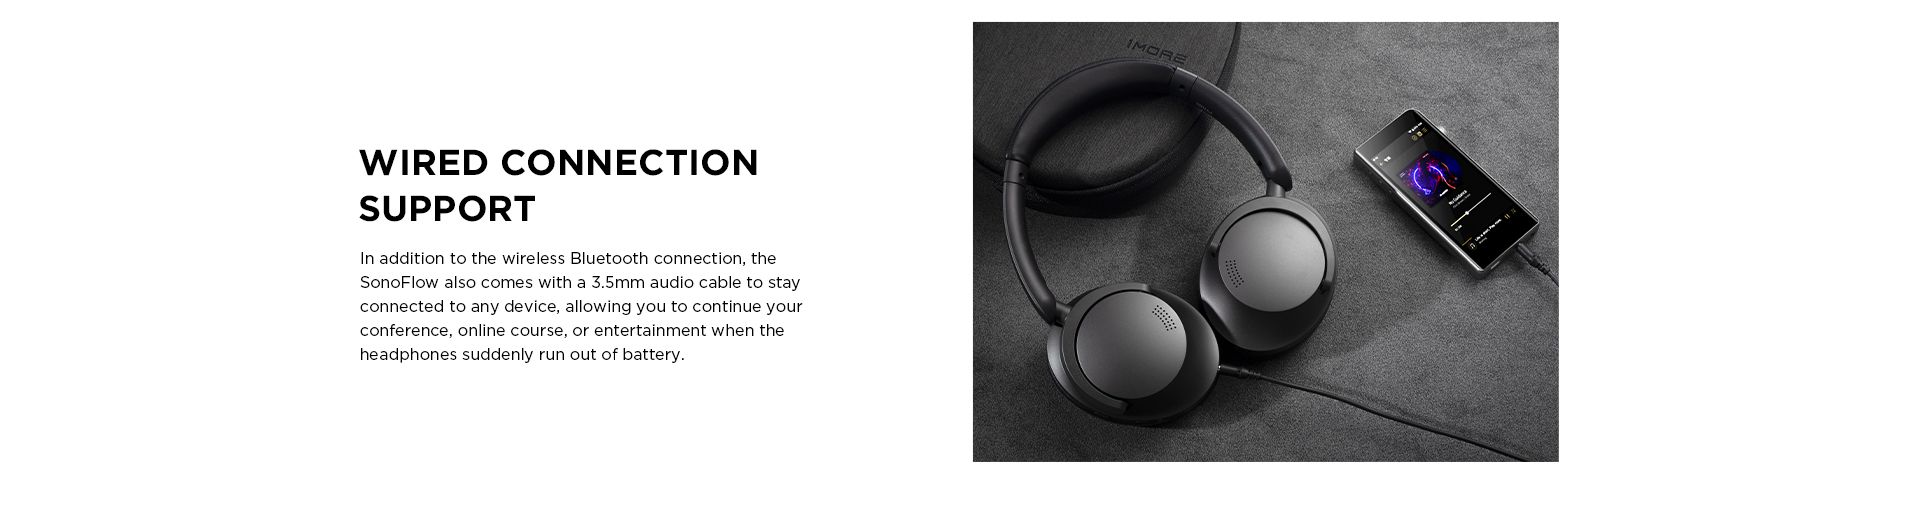 1MORE Sonoflow Wireless Bluetooth Active Noise Canceling Headphones, Hi-Res  LDAC 12 EQ, 70H Battery, Connect 2 Devices, 5 Mic